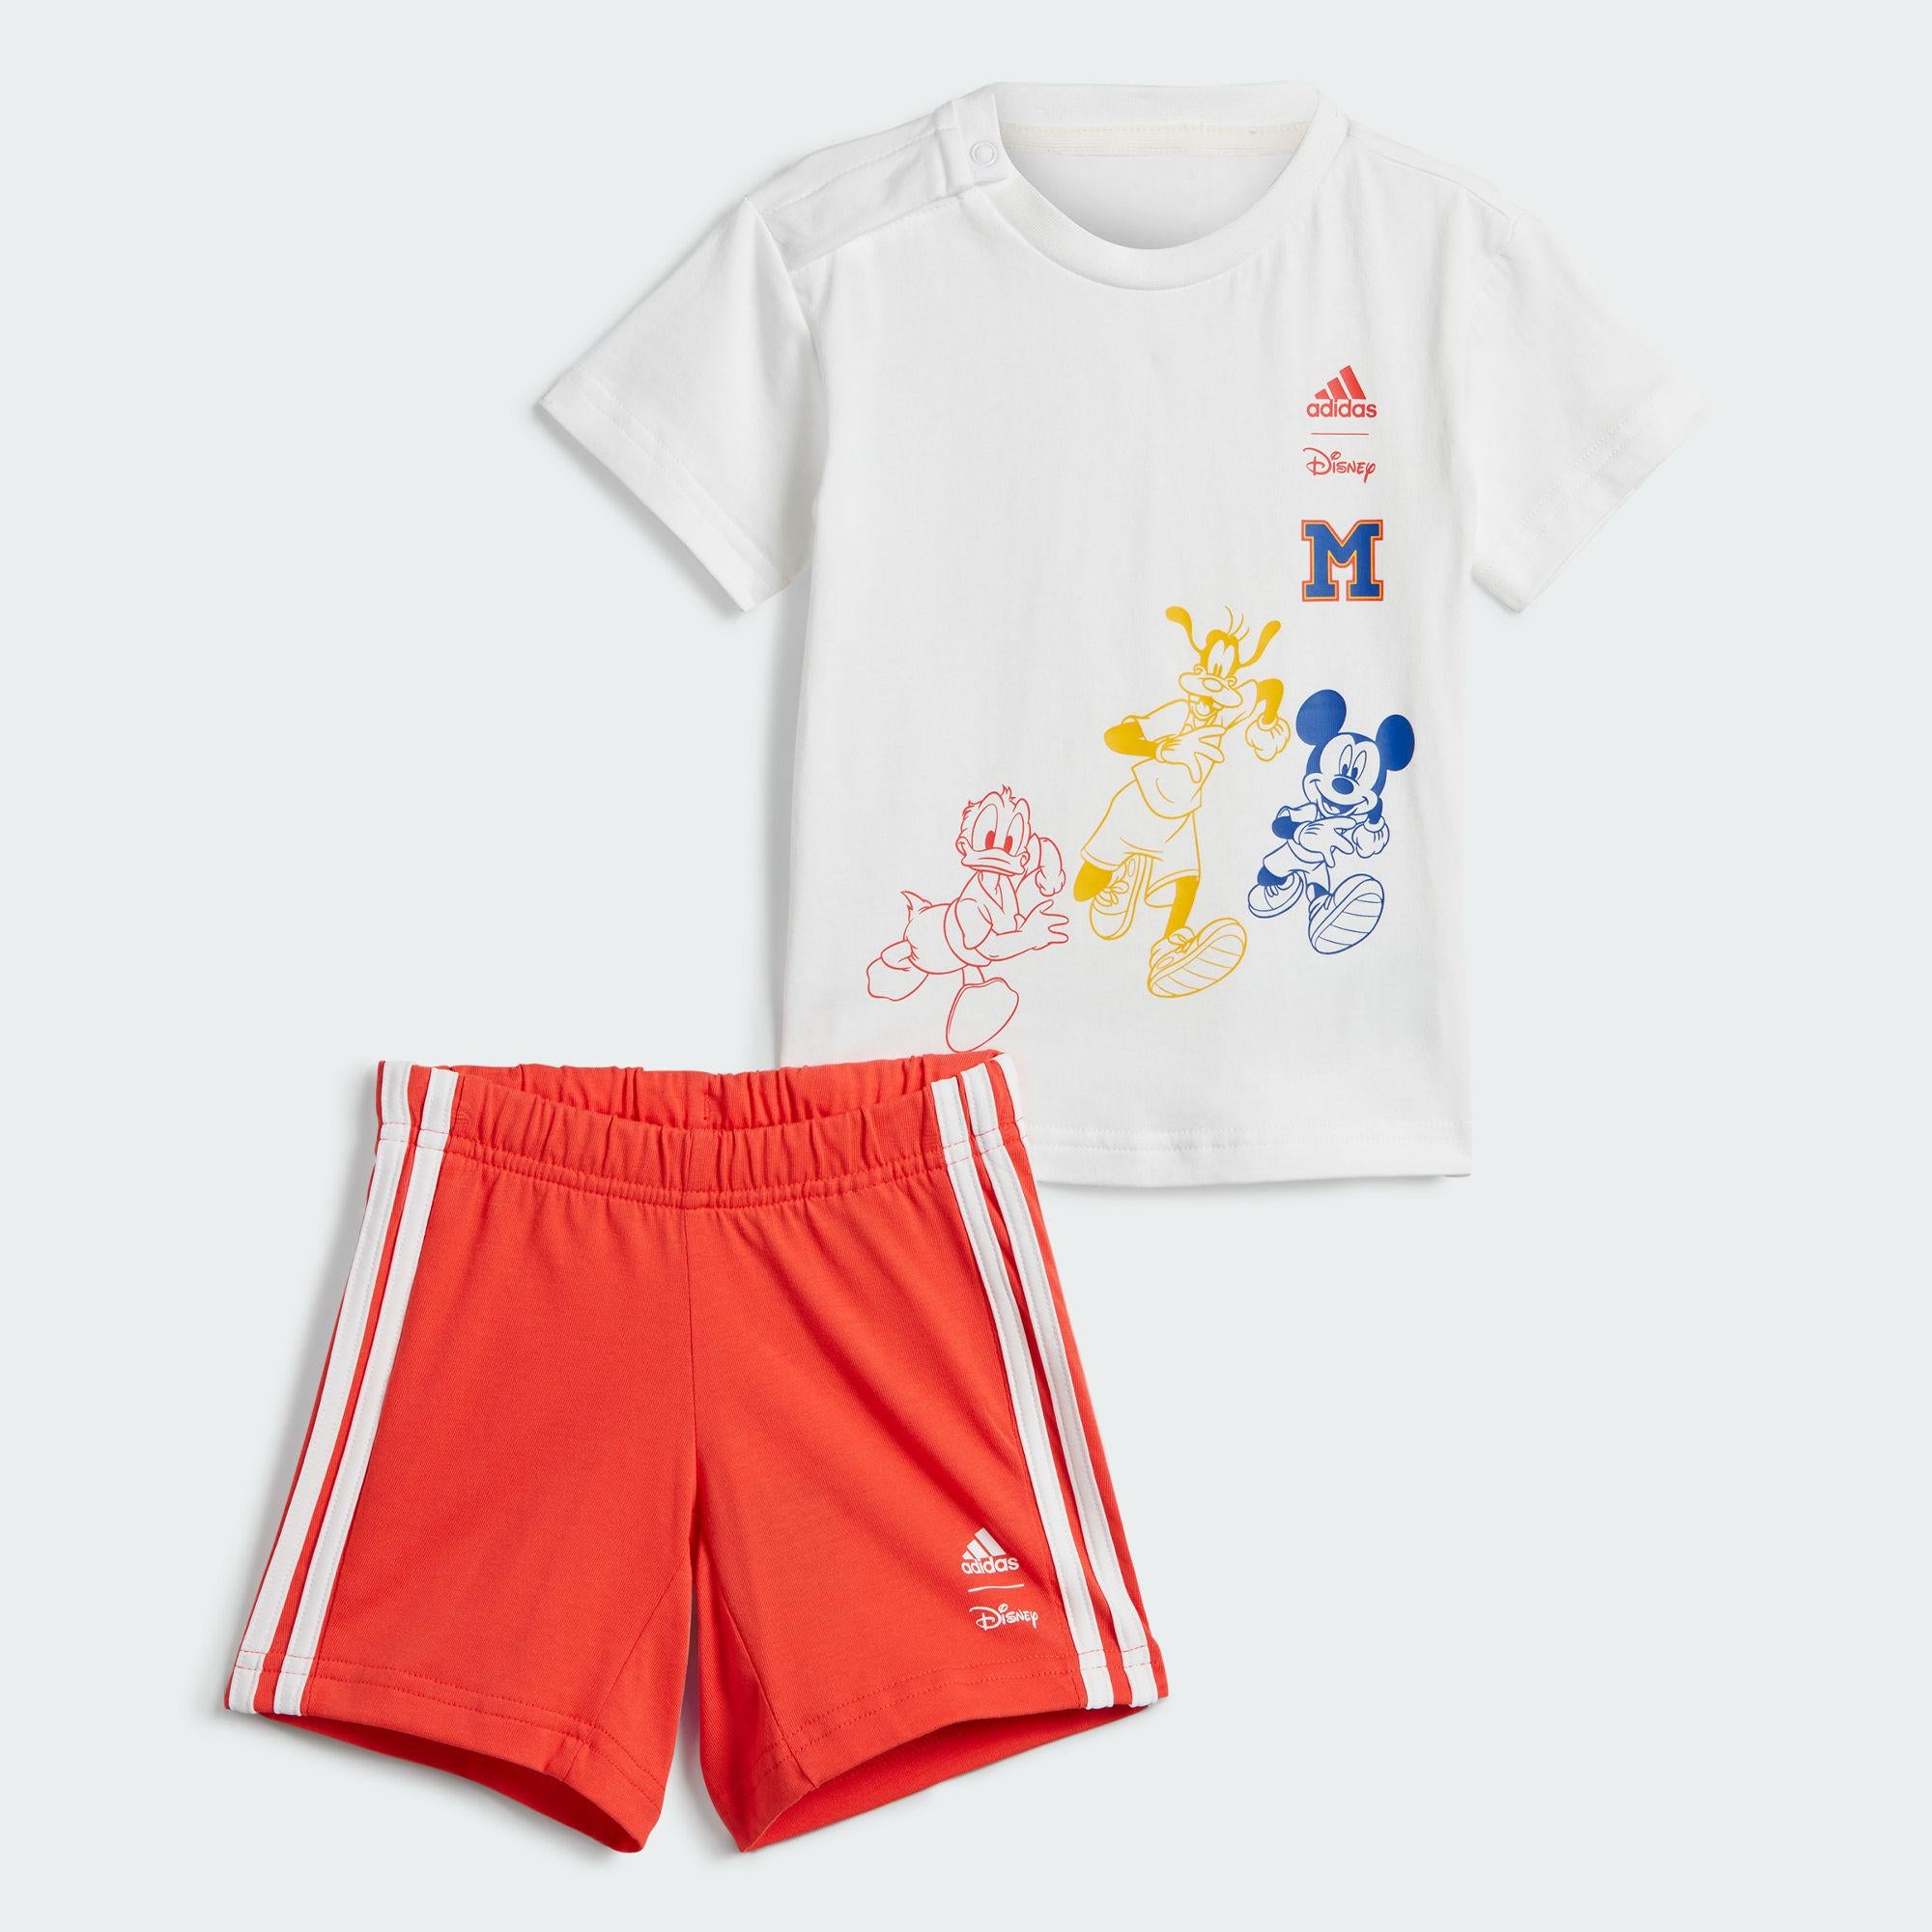  Adidas, boy, clothes, DISNEY,  girl,  套裝, 嬰童, 短袖, open for kids